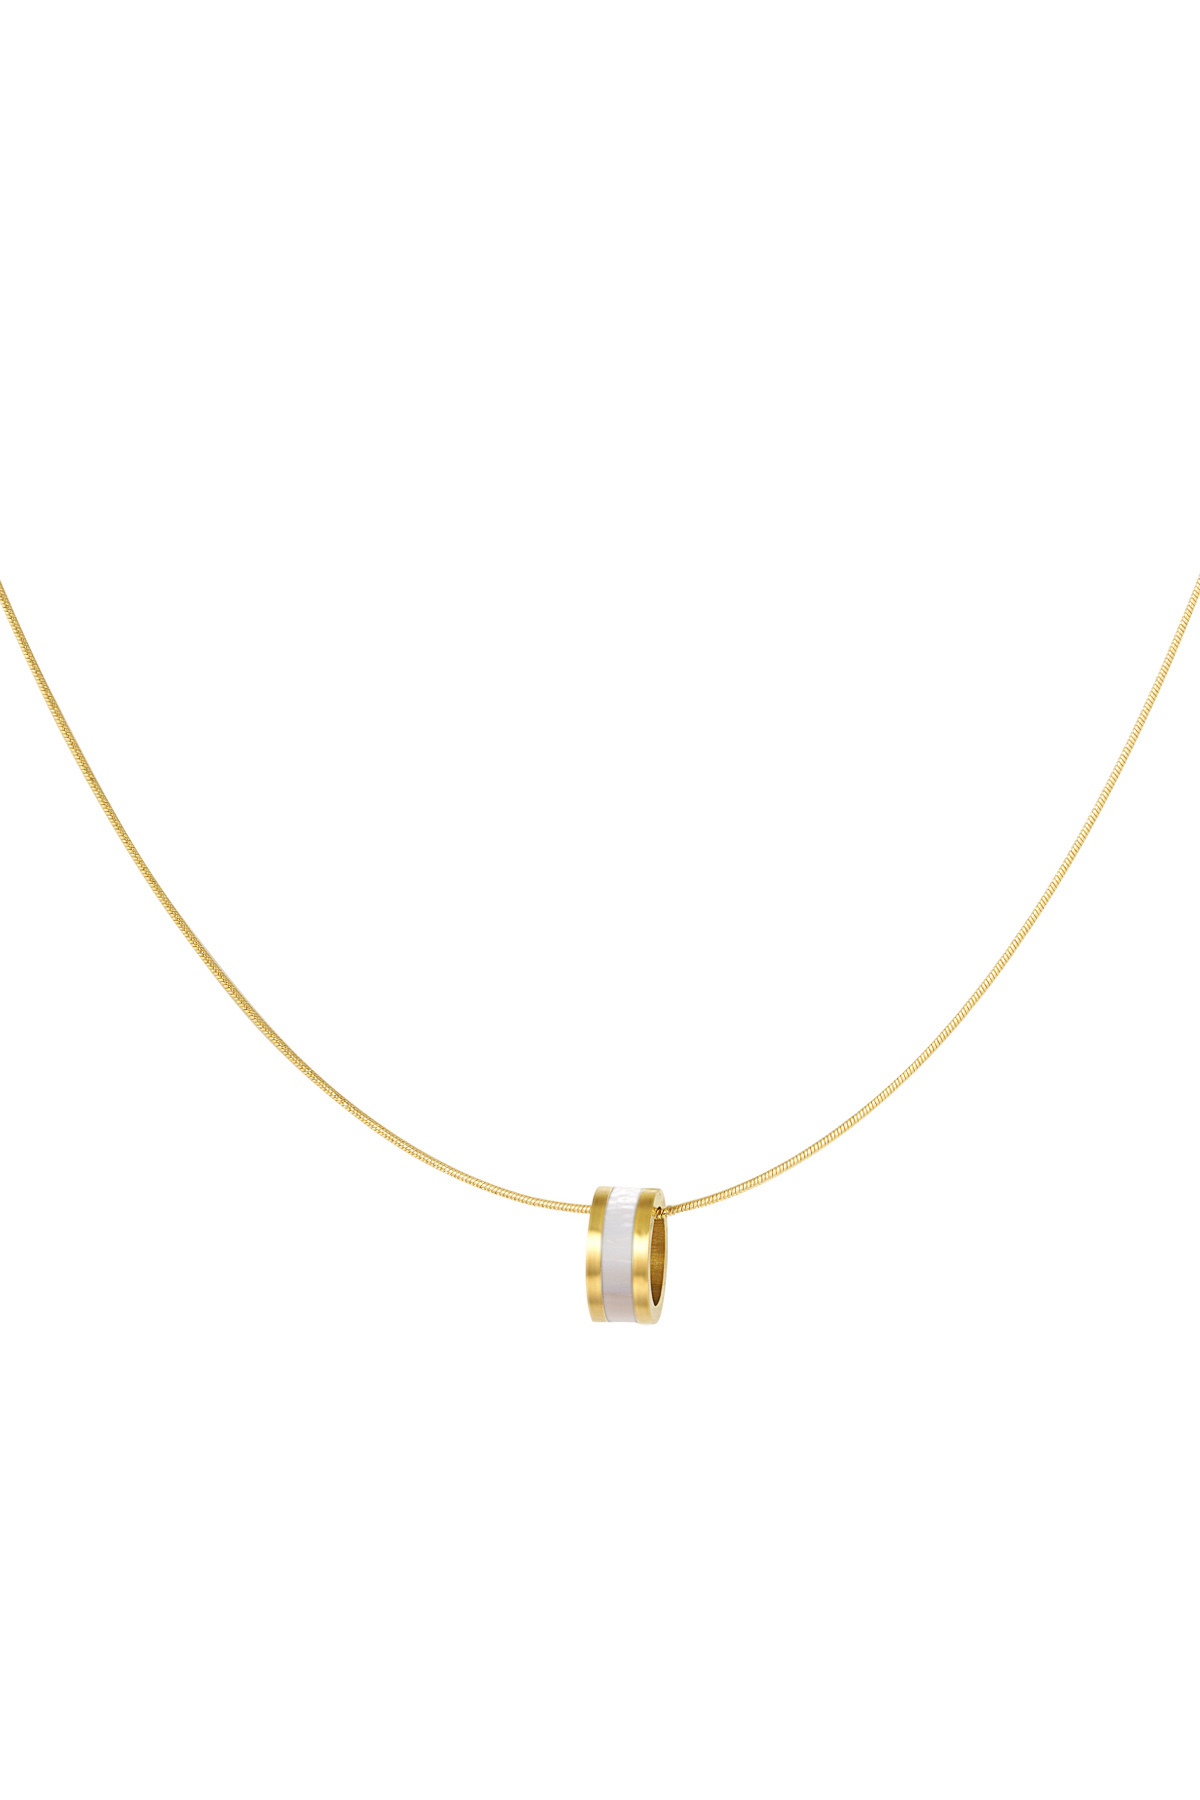 Necklace colored charm - gold/white 